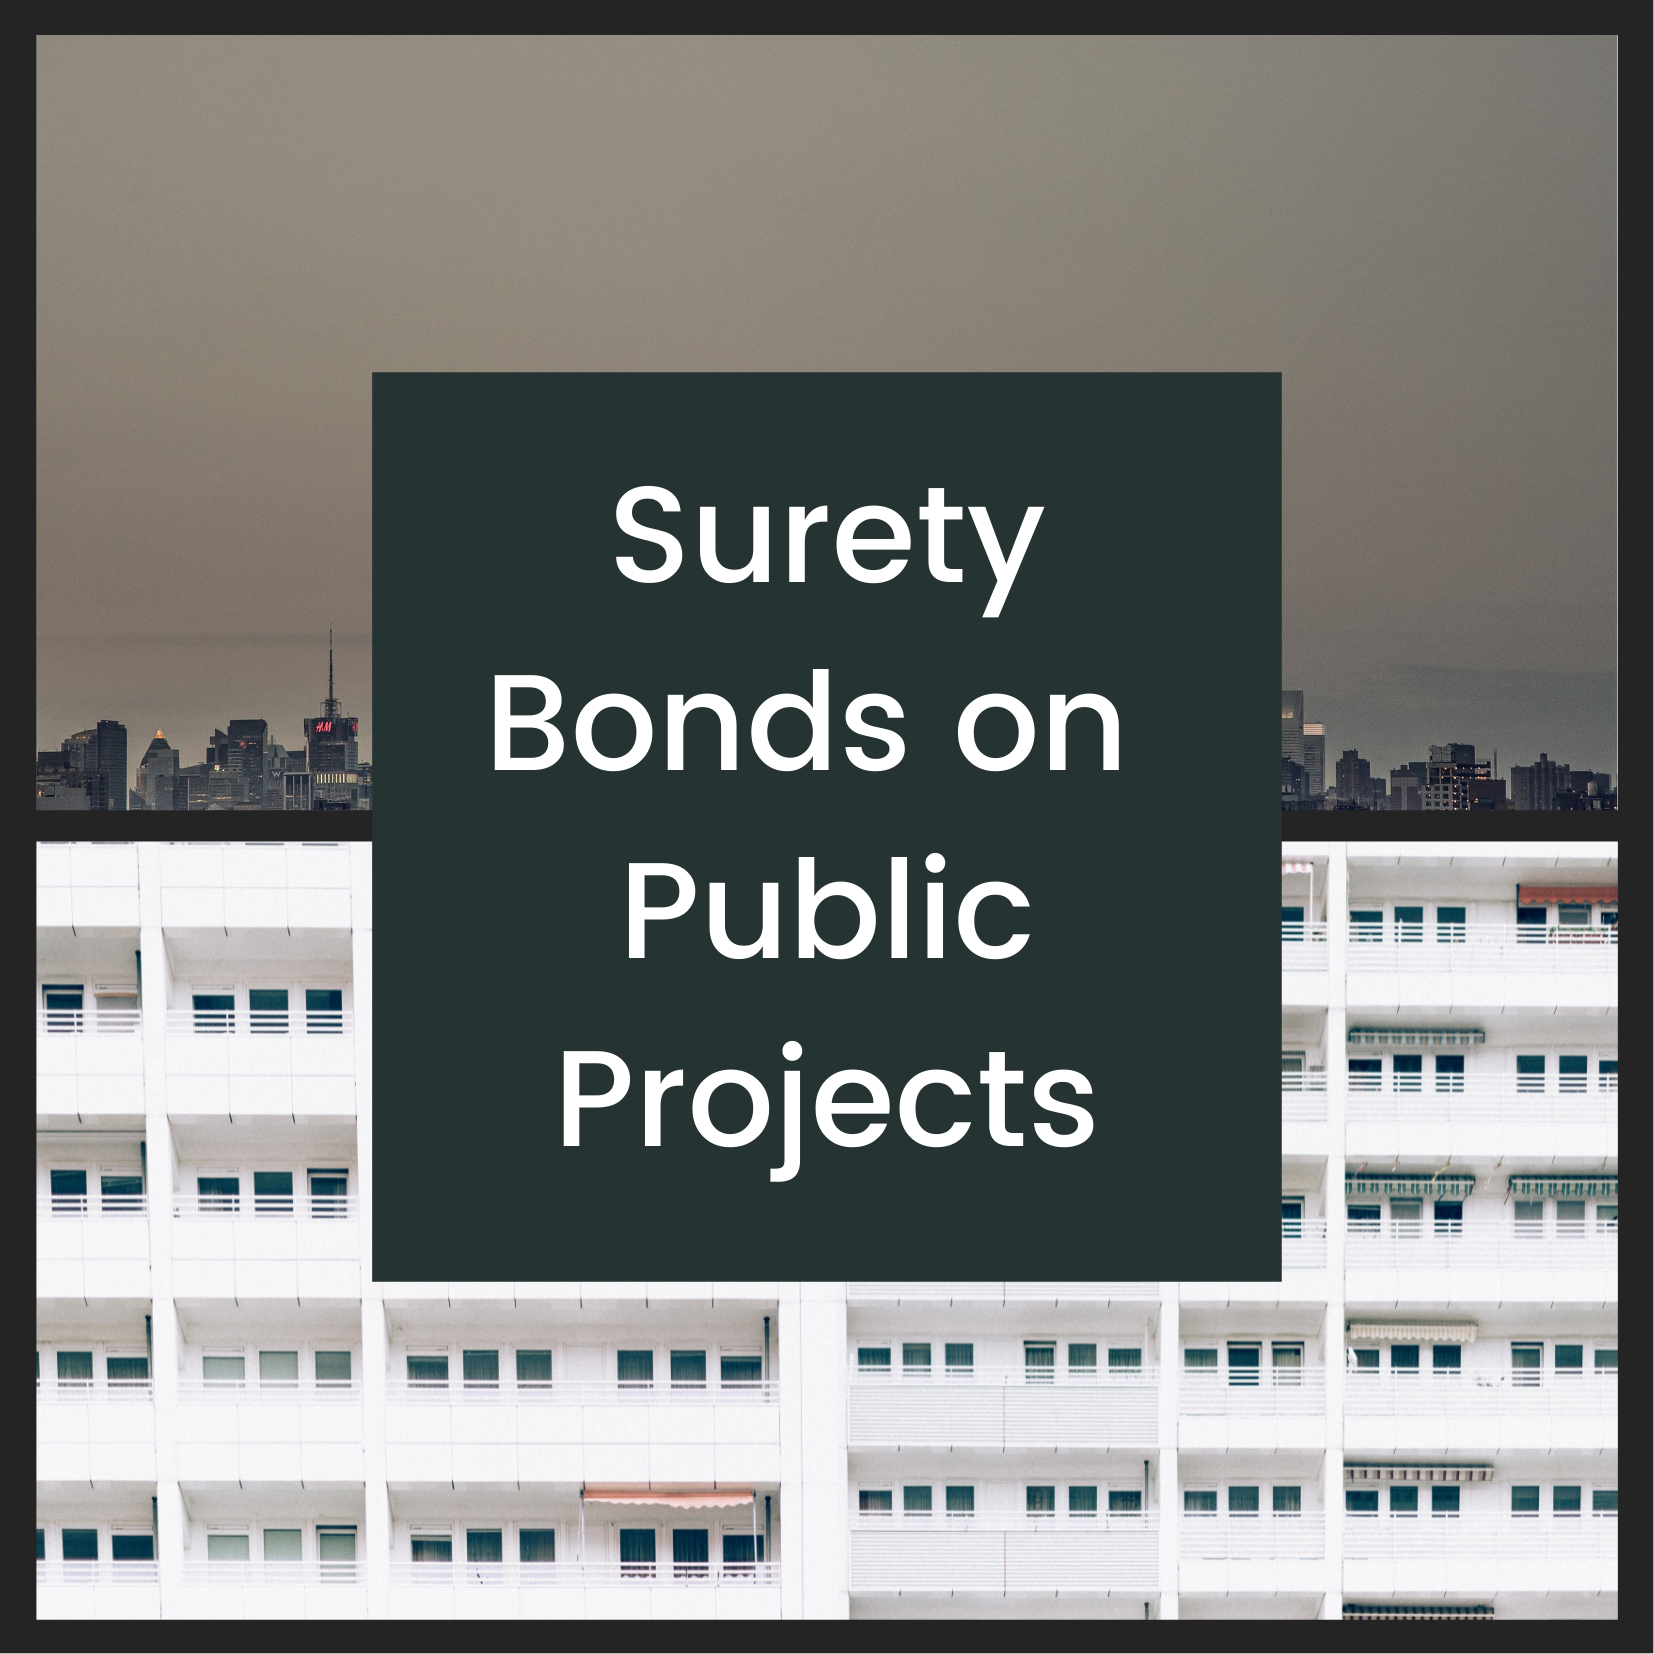 surety bonds - is a surety bond needed for public projects - outdoor of a white building with a lot of windows